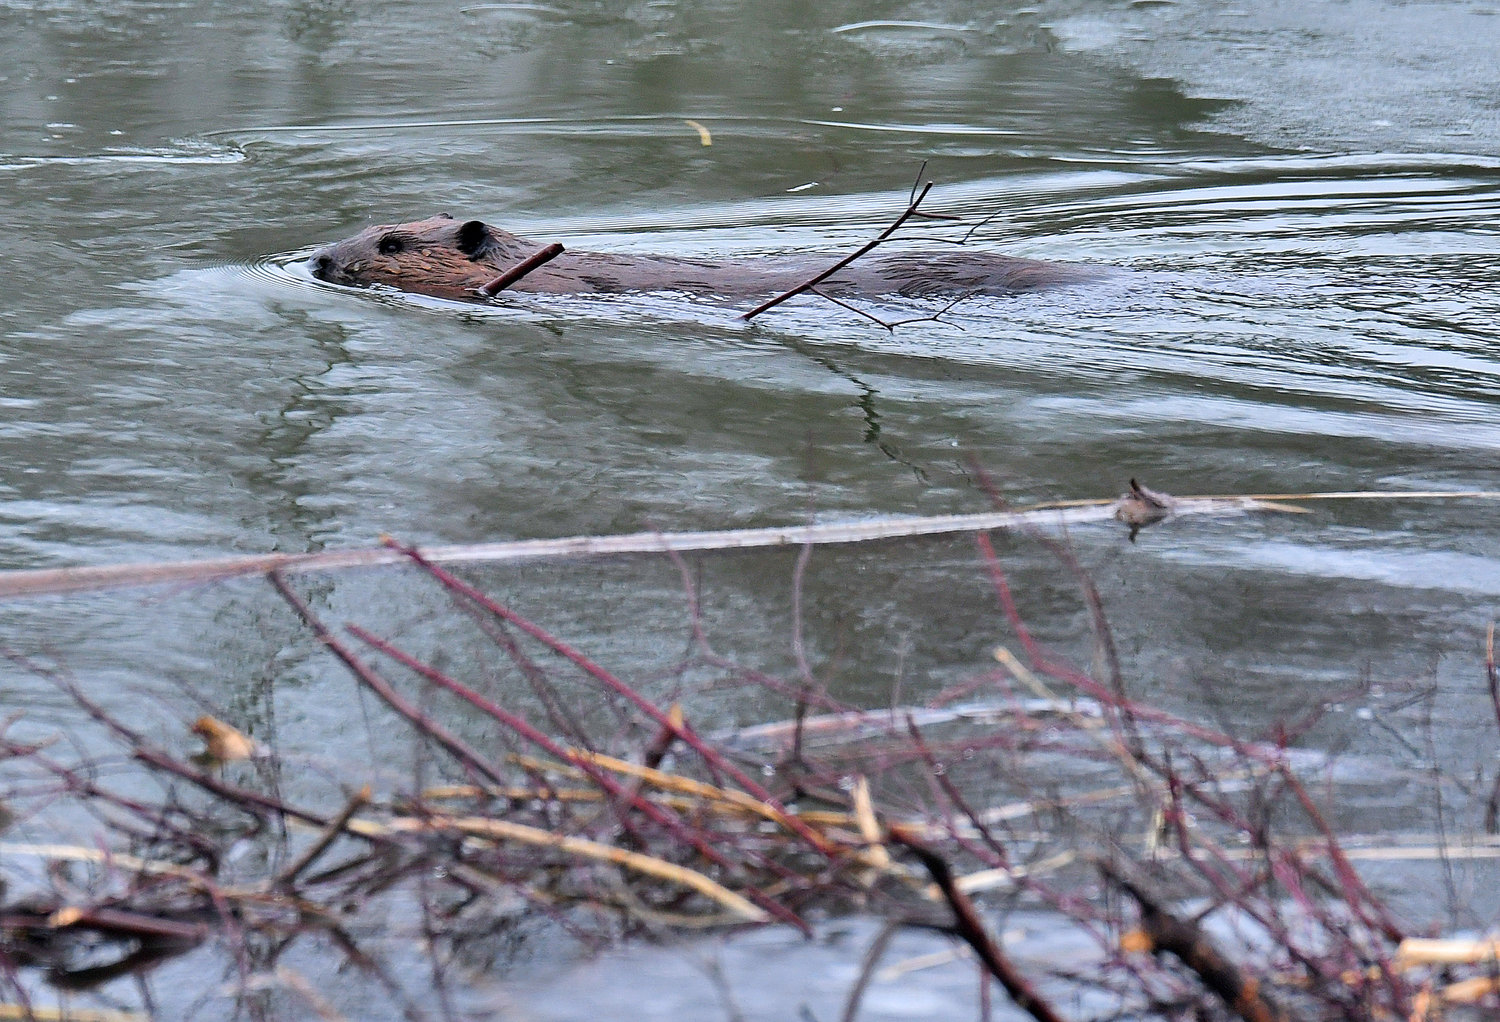 A North American beaver moves branches around with its mouth as work continues on its lodge at Delta Lake State Park. Beavers are semiaquatic rodents and like to eat the bark and twigs of popular, aspen, birch, willow and maple trees.